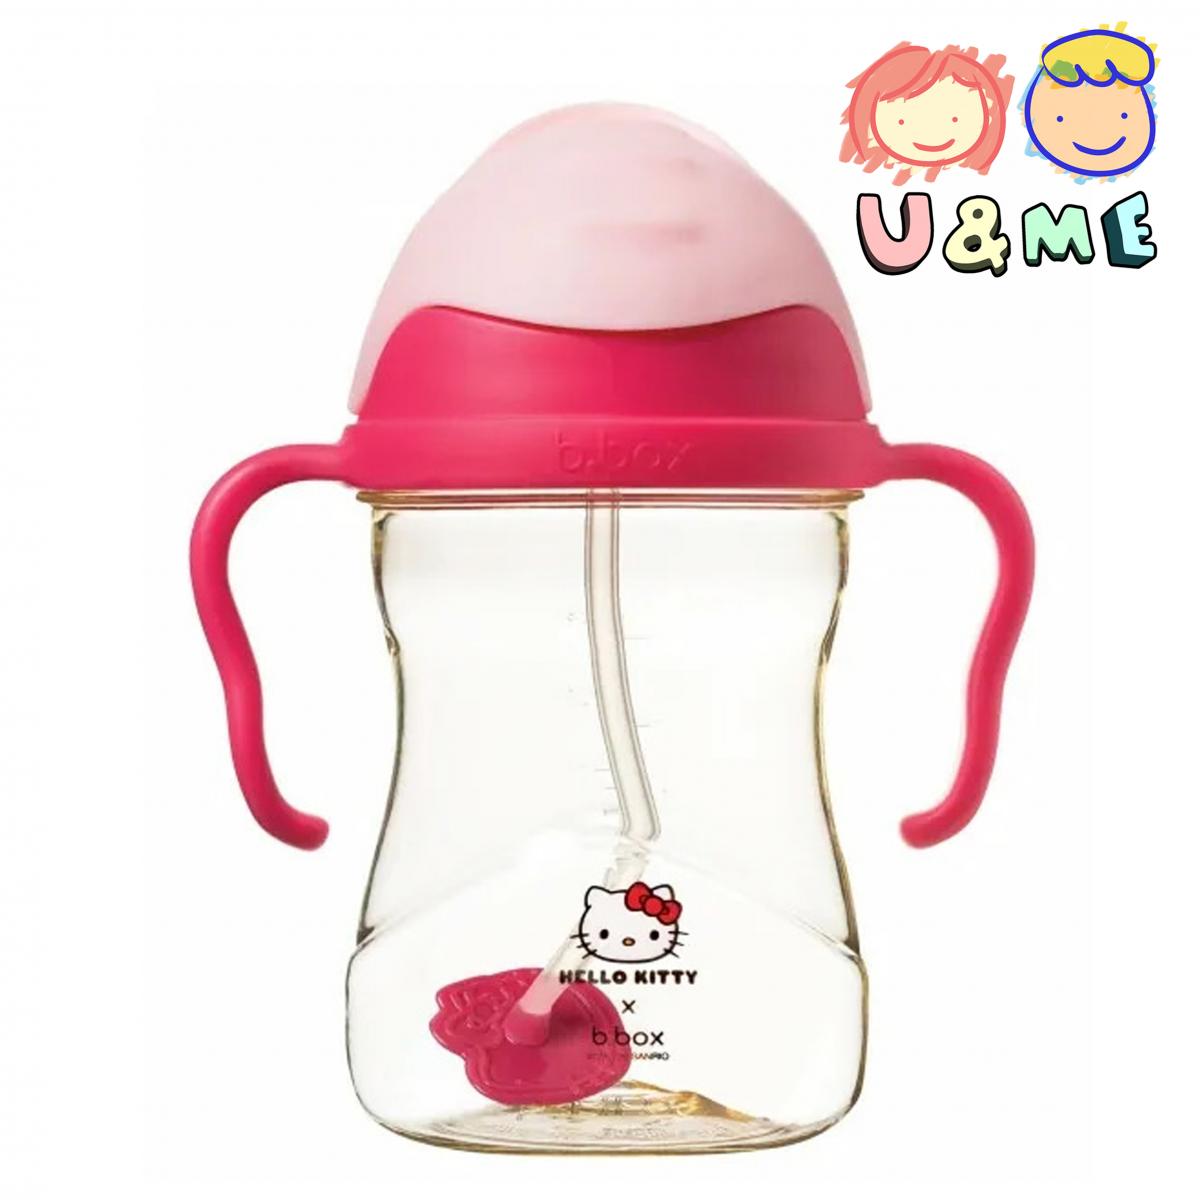 PPSU Hello Kitty Sippy Cup Deluxe Edition 240ml - Pop Star (Pink+Red) (Parallel Import) 6M+